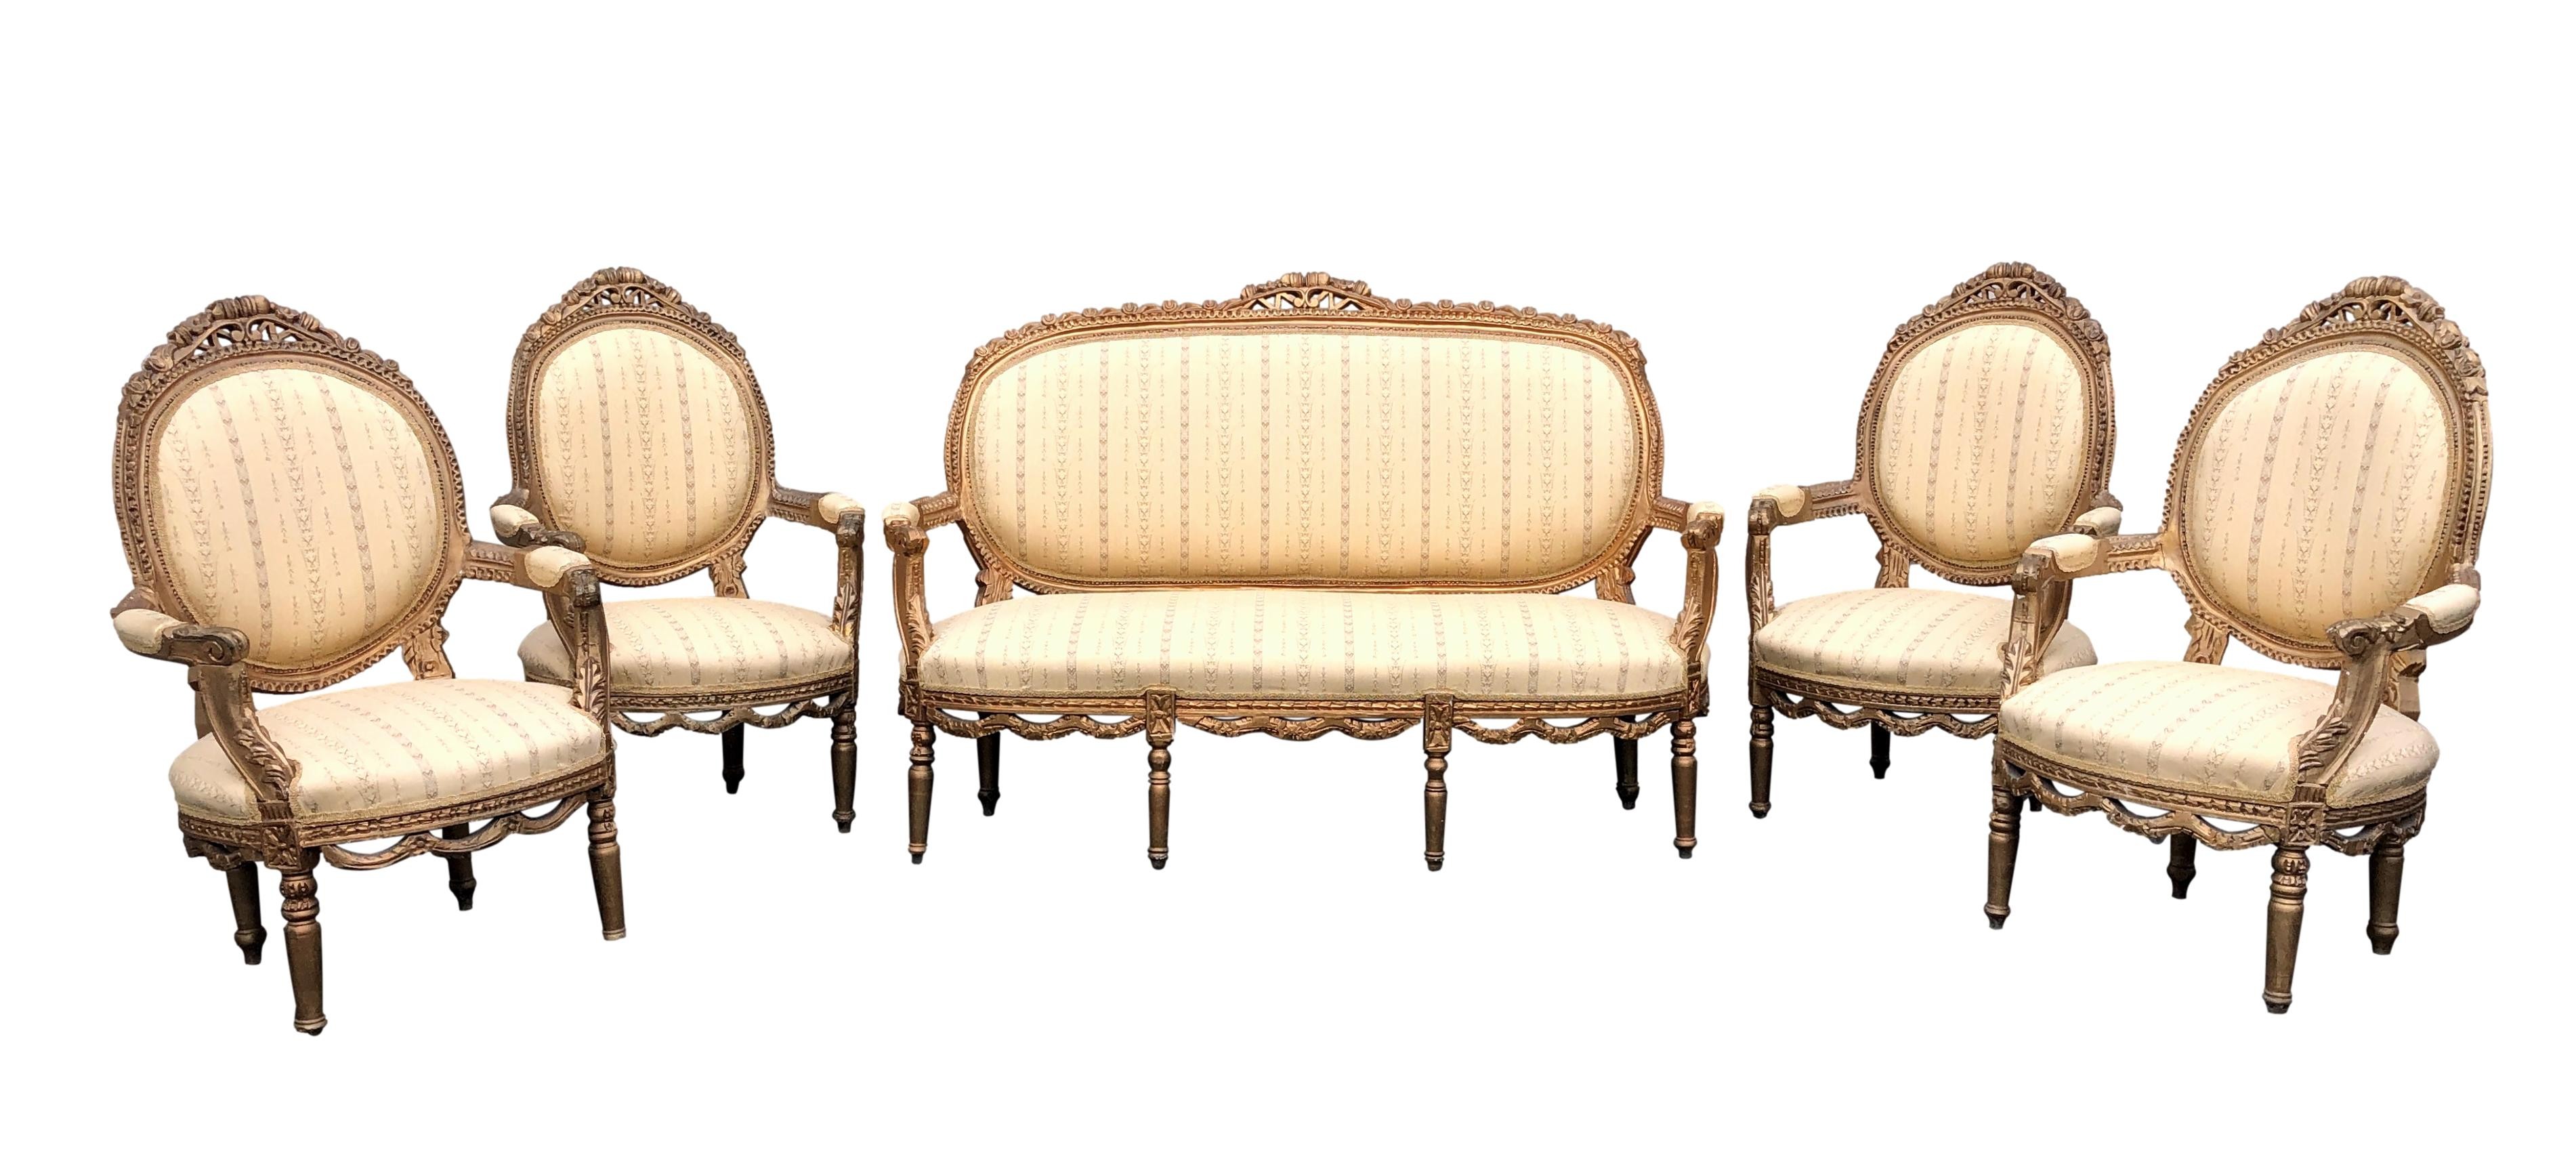 A Louis XVI style gilt painted carved beechwood salon suite, early 20th century, comprising a canape